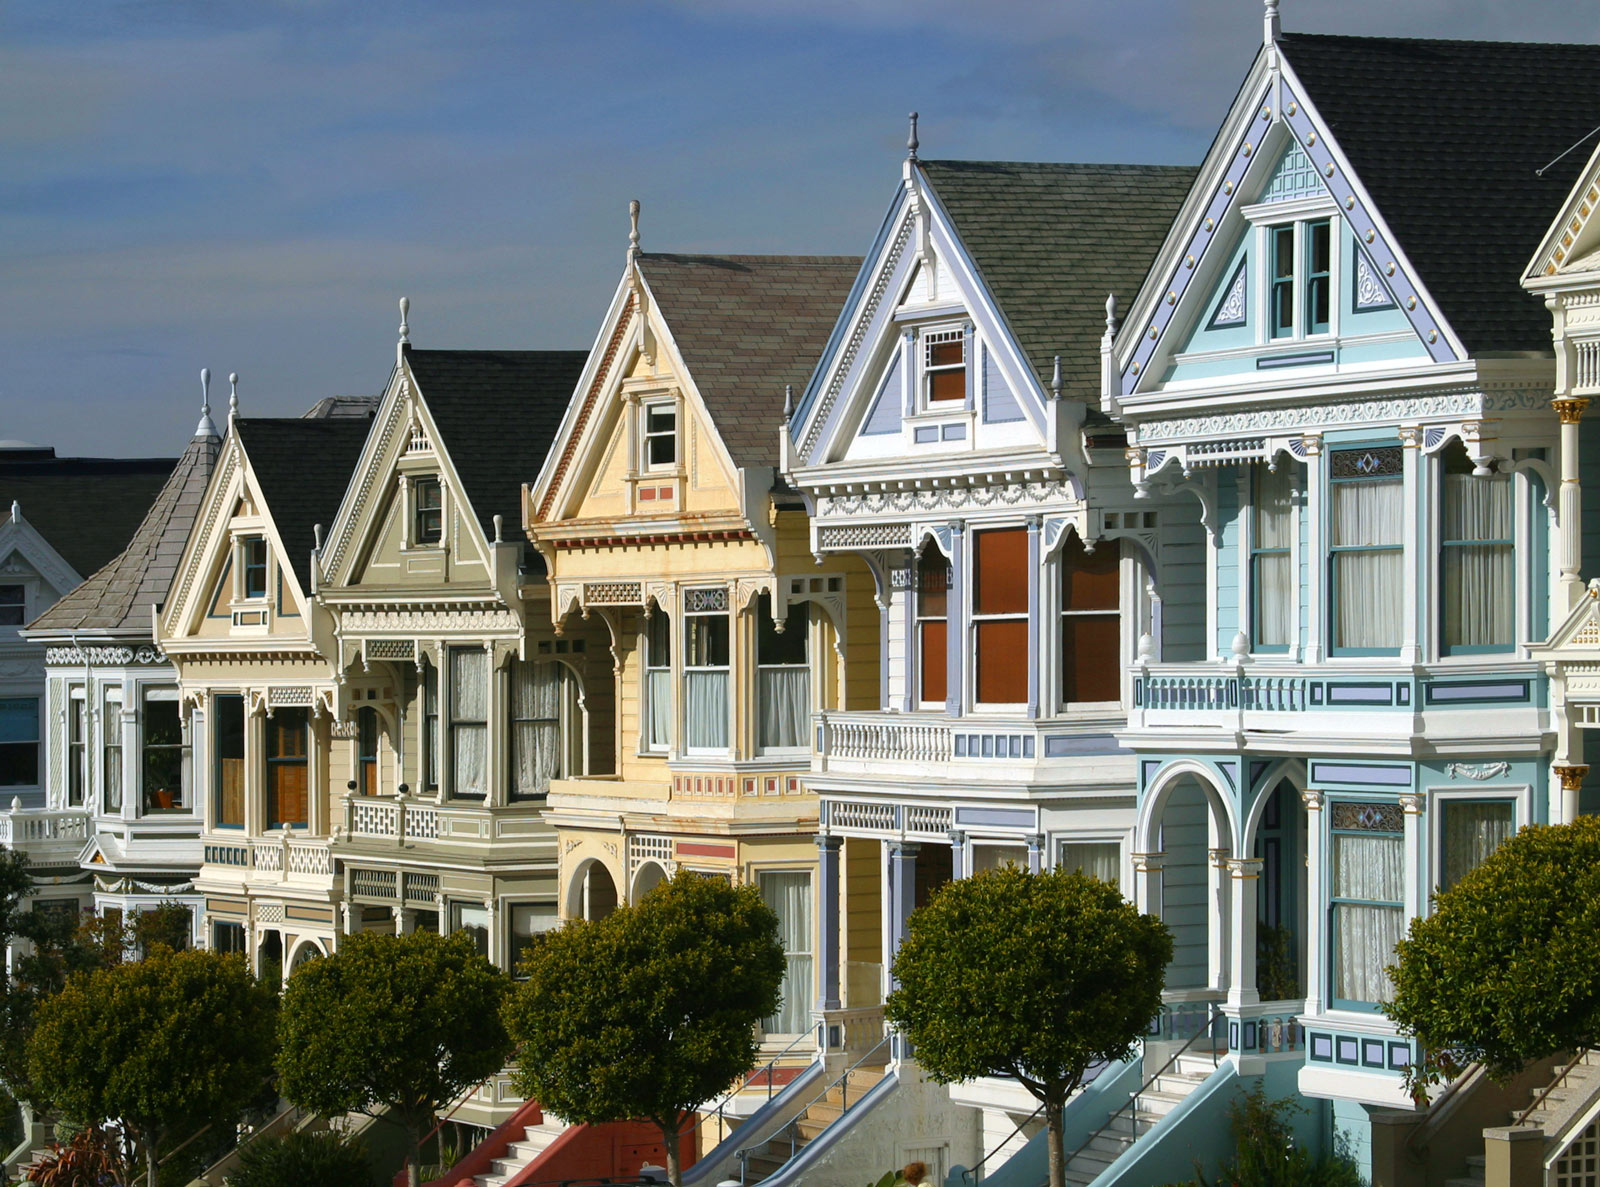 5 colored houses known as "The Painted ladies" shown in Alamo Square San Francisco.